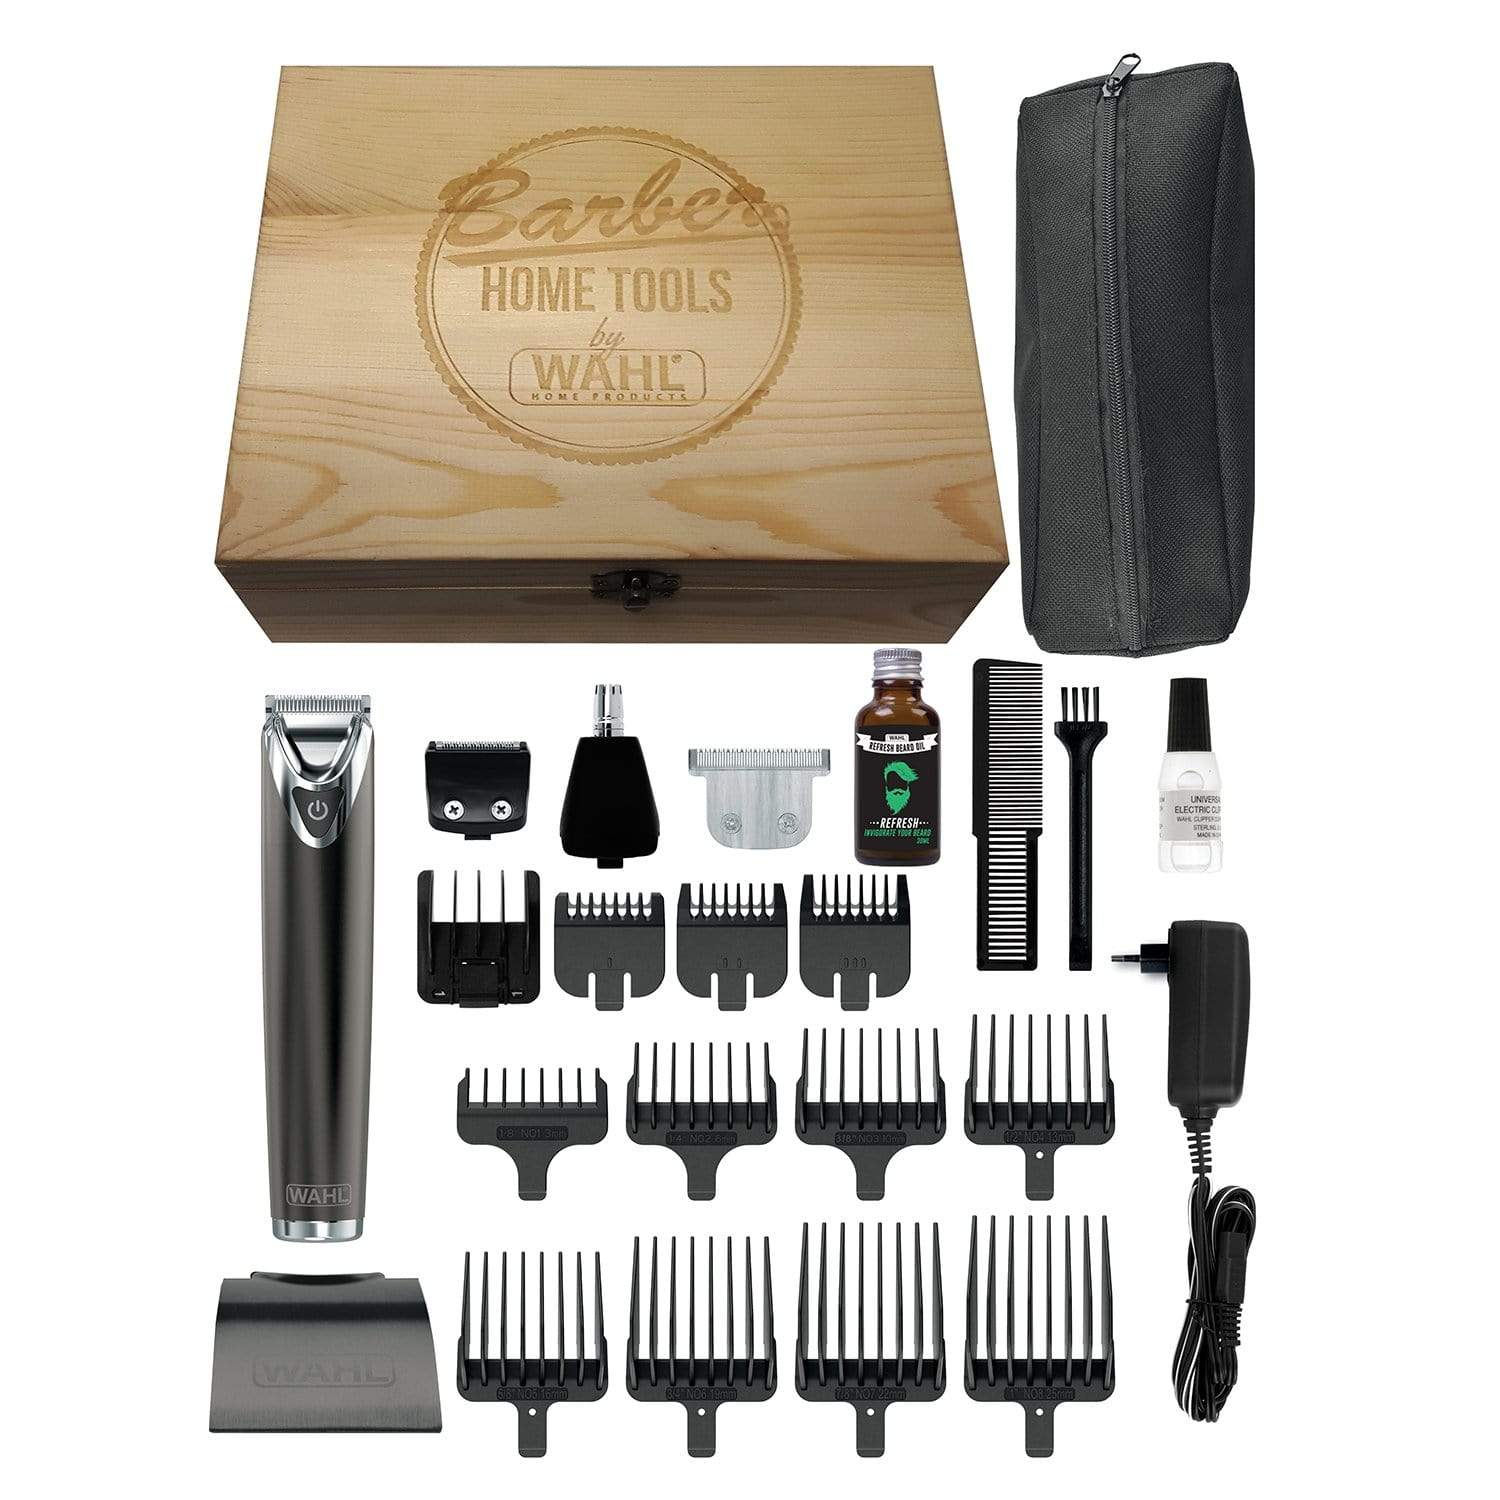 WAHL STAINLESS STEEL ADVANCE IN WOODEN BOX - 9864-0415